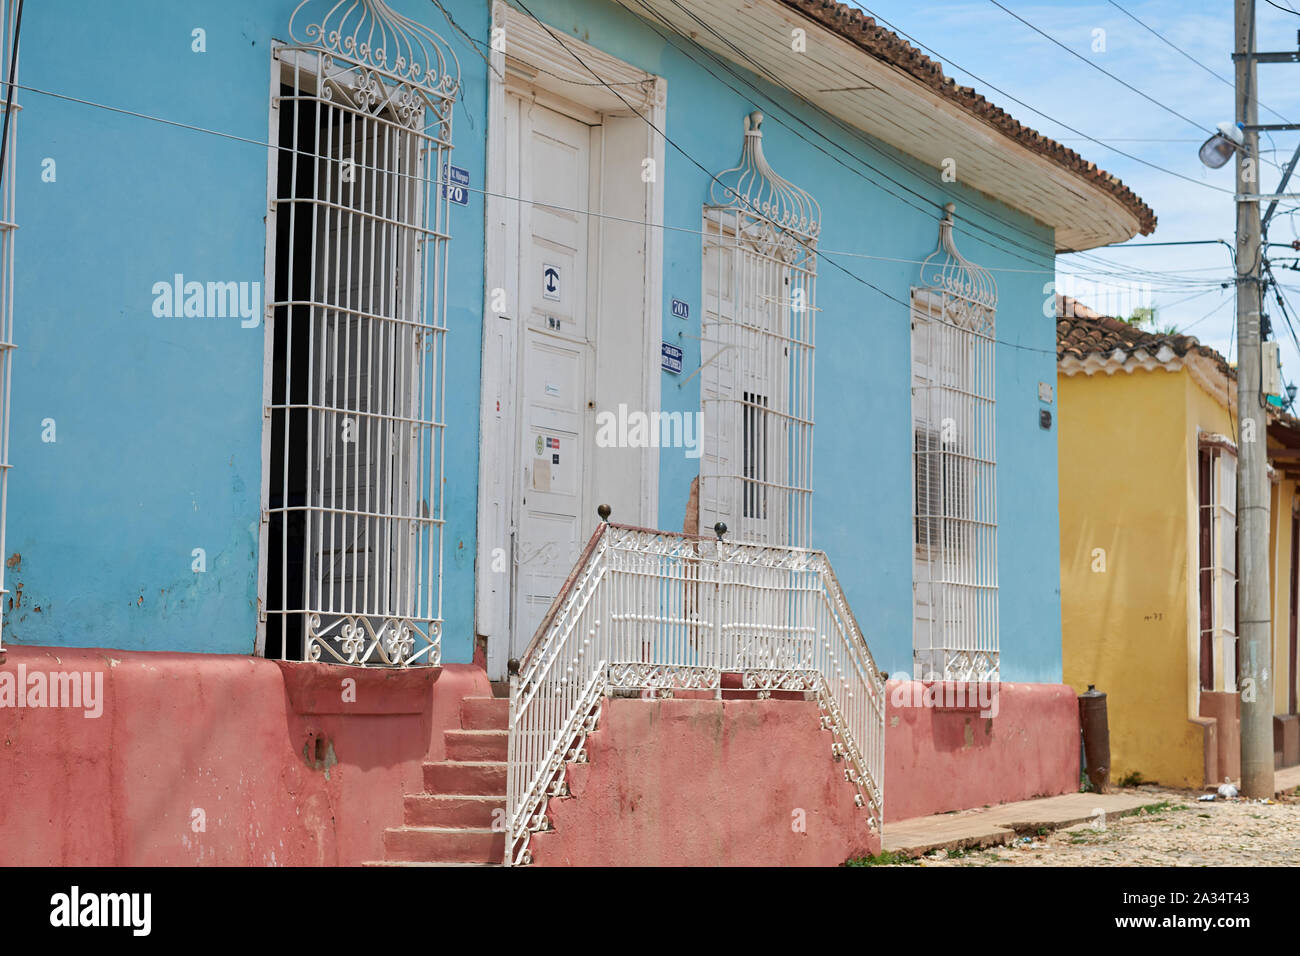 Colorful walls, sunshine and shadow on the streets of Trinidad, Cuba Stock Photo